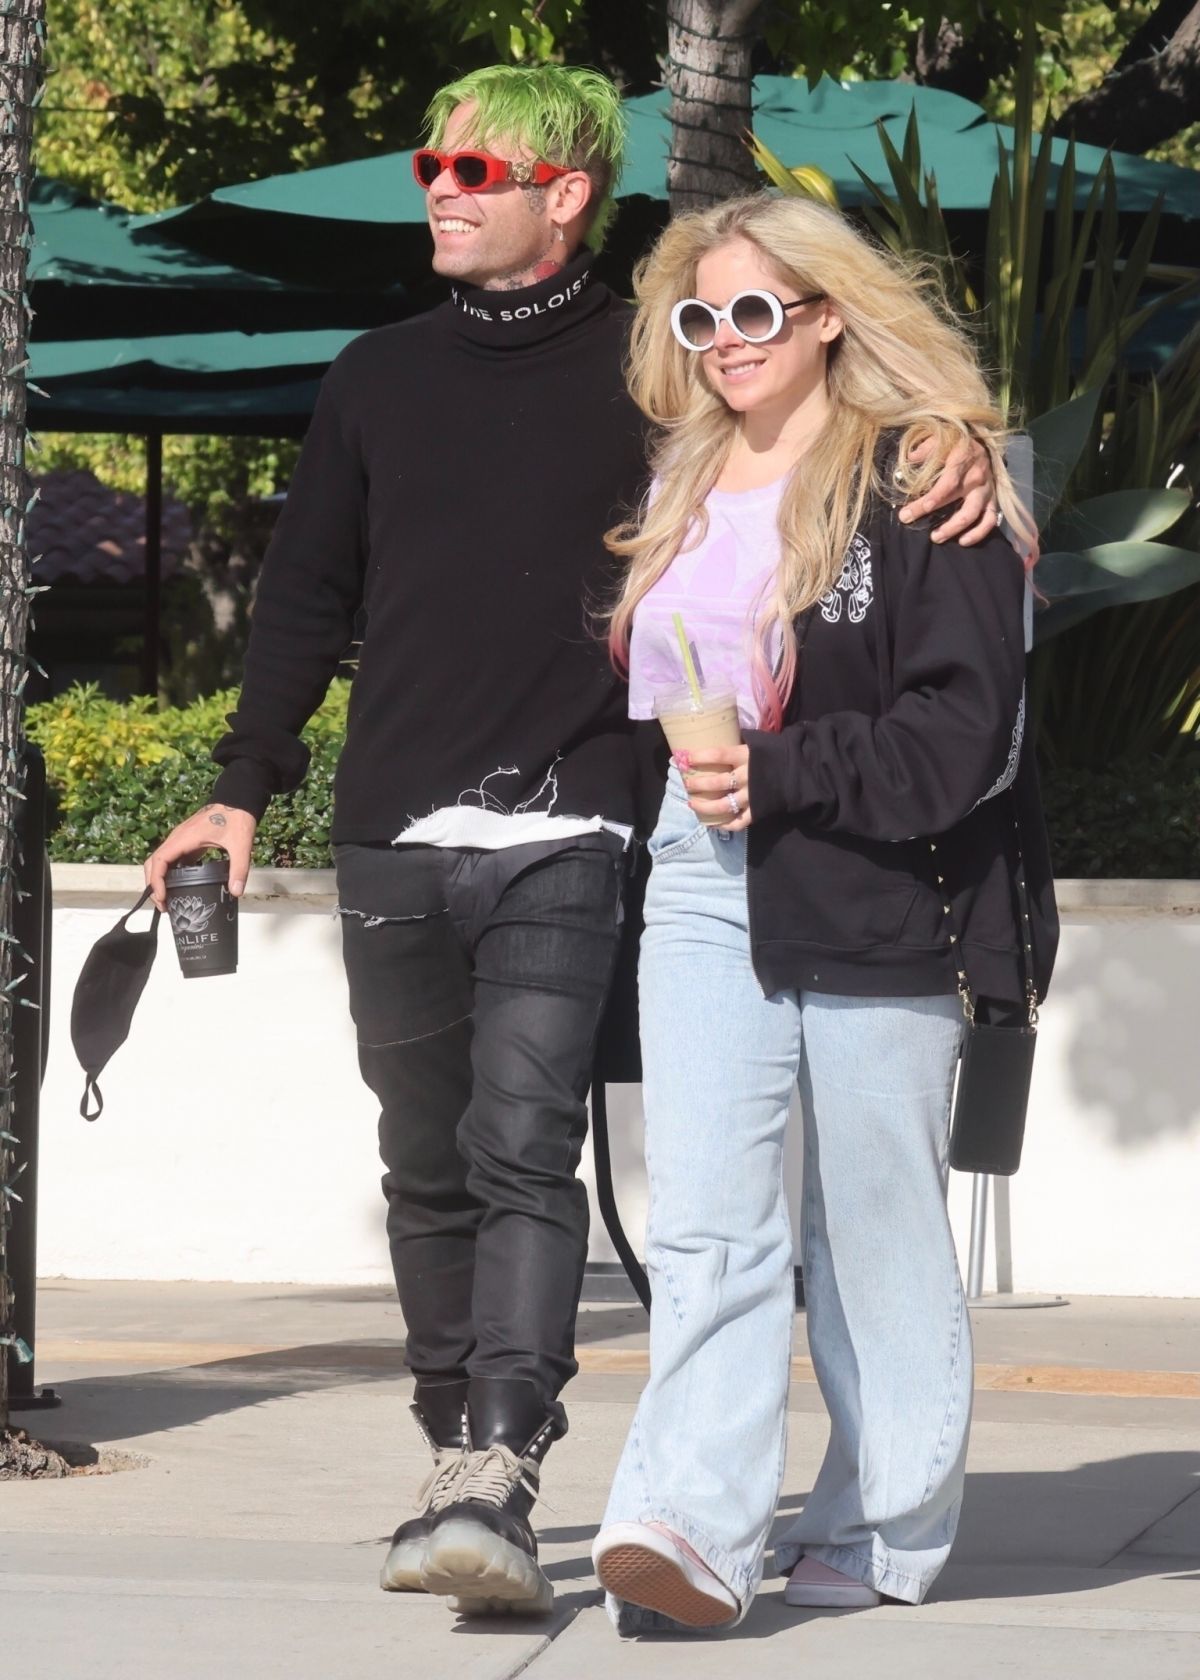 avril-lavigne-and-mod-sun-out-for-coffee-in-malibu-05-11-2021-0.jpg